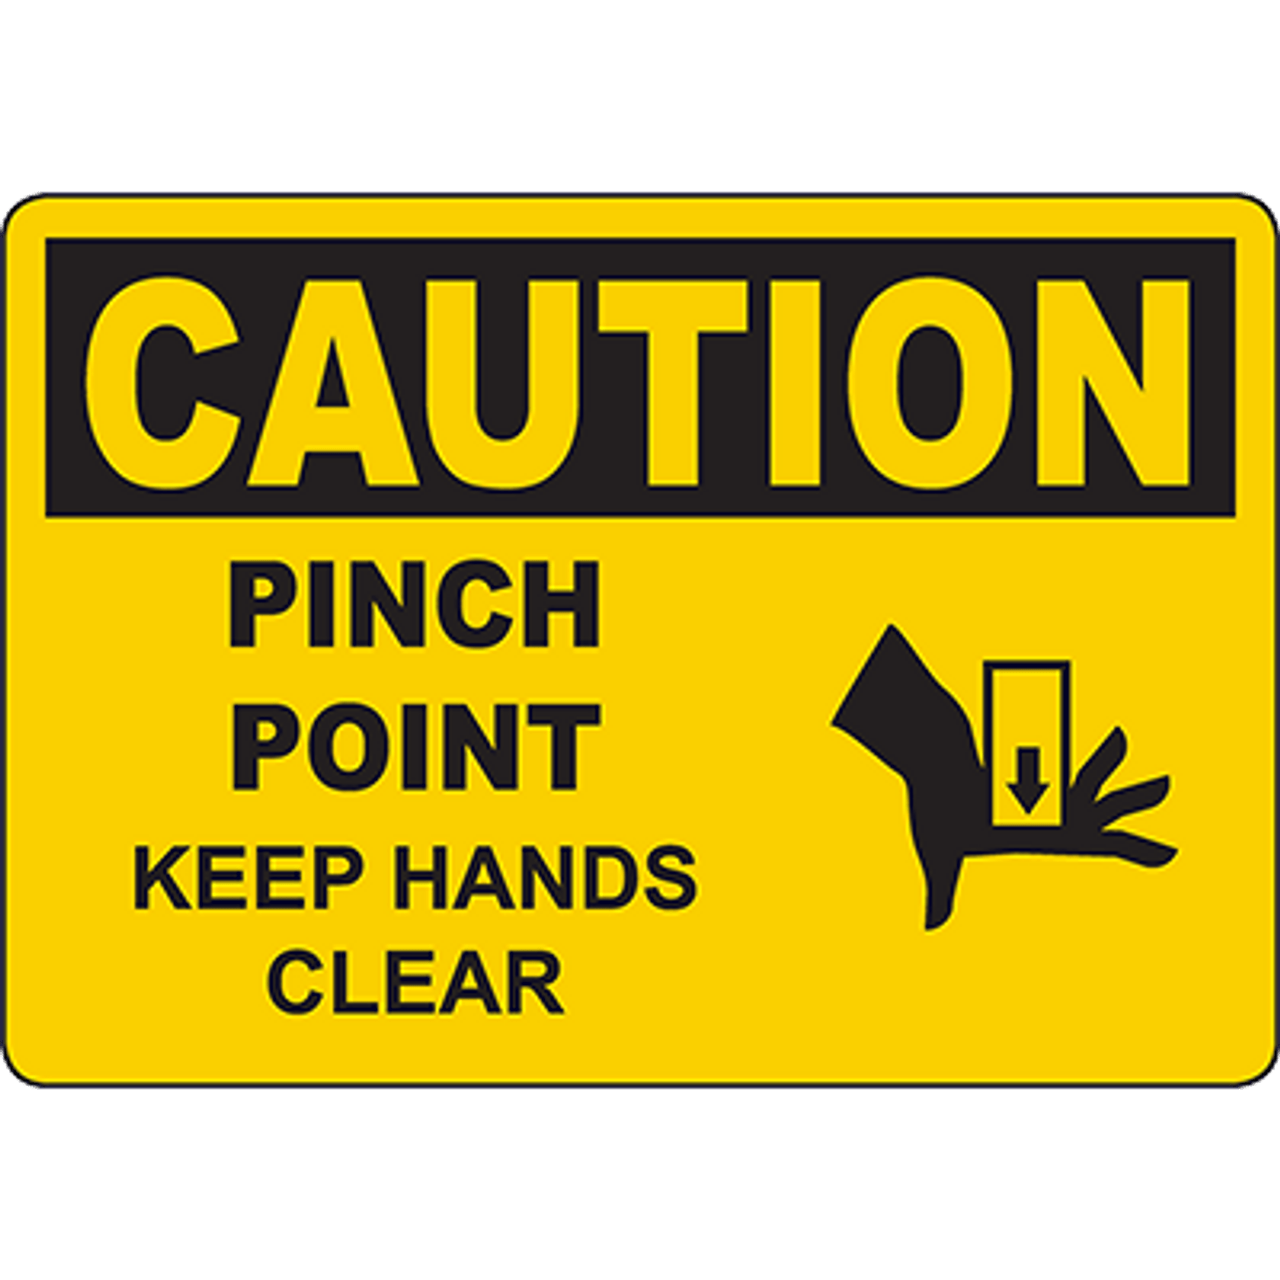 CAUTION Pinch Point Keep Hands Clear Sign | Graphic Products